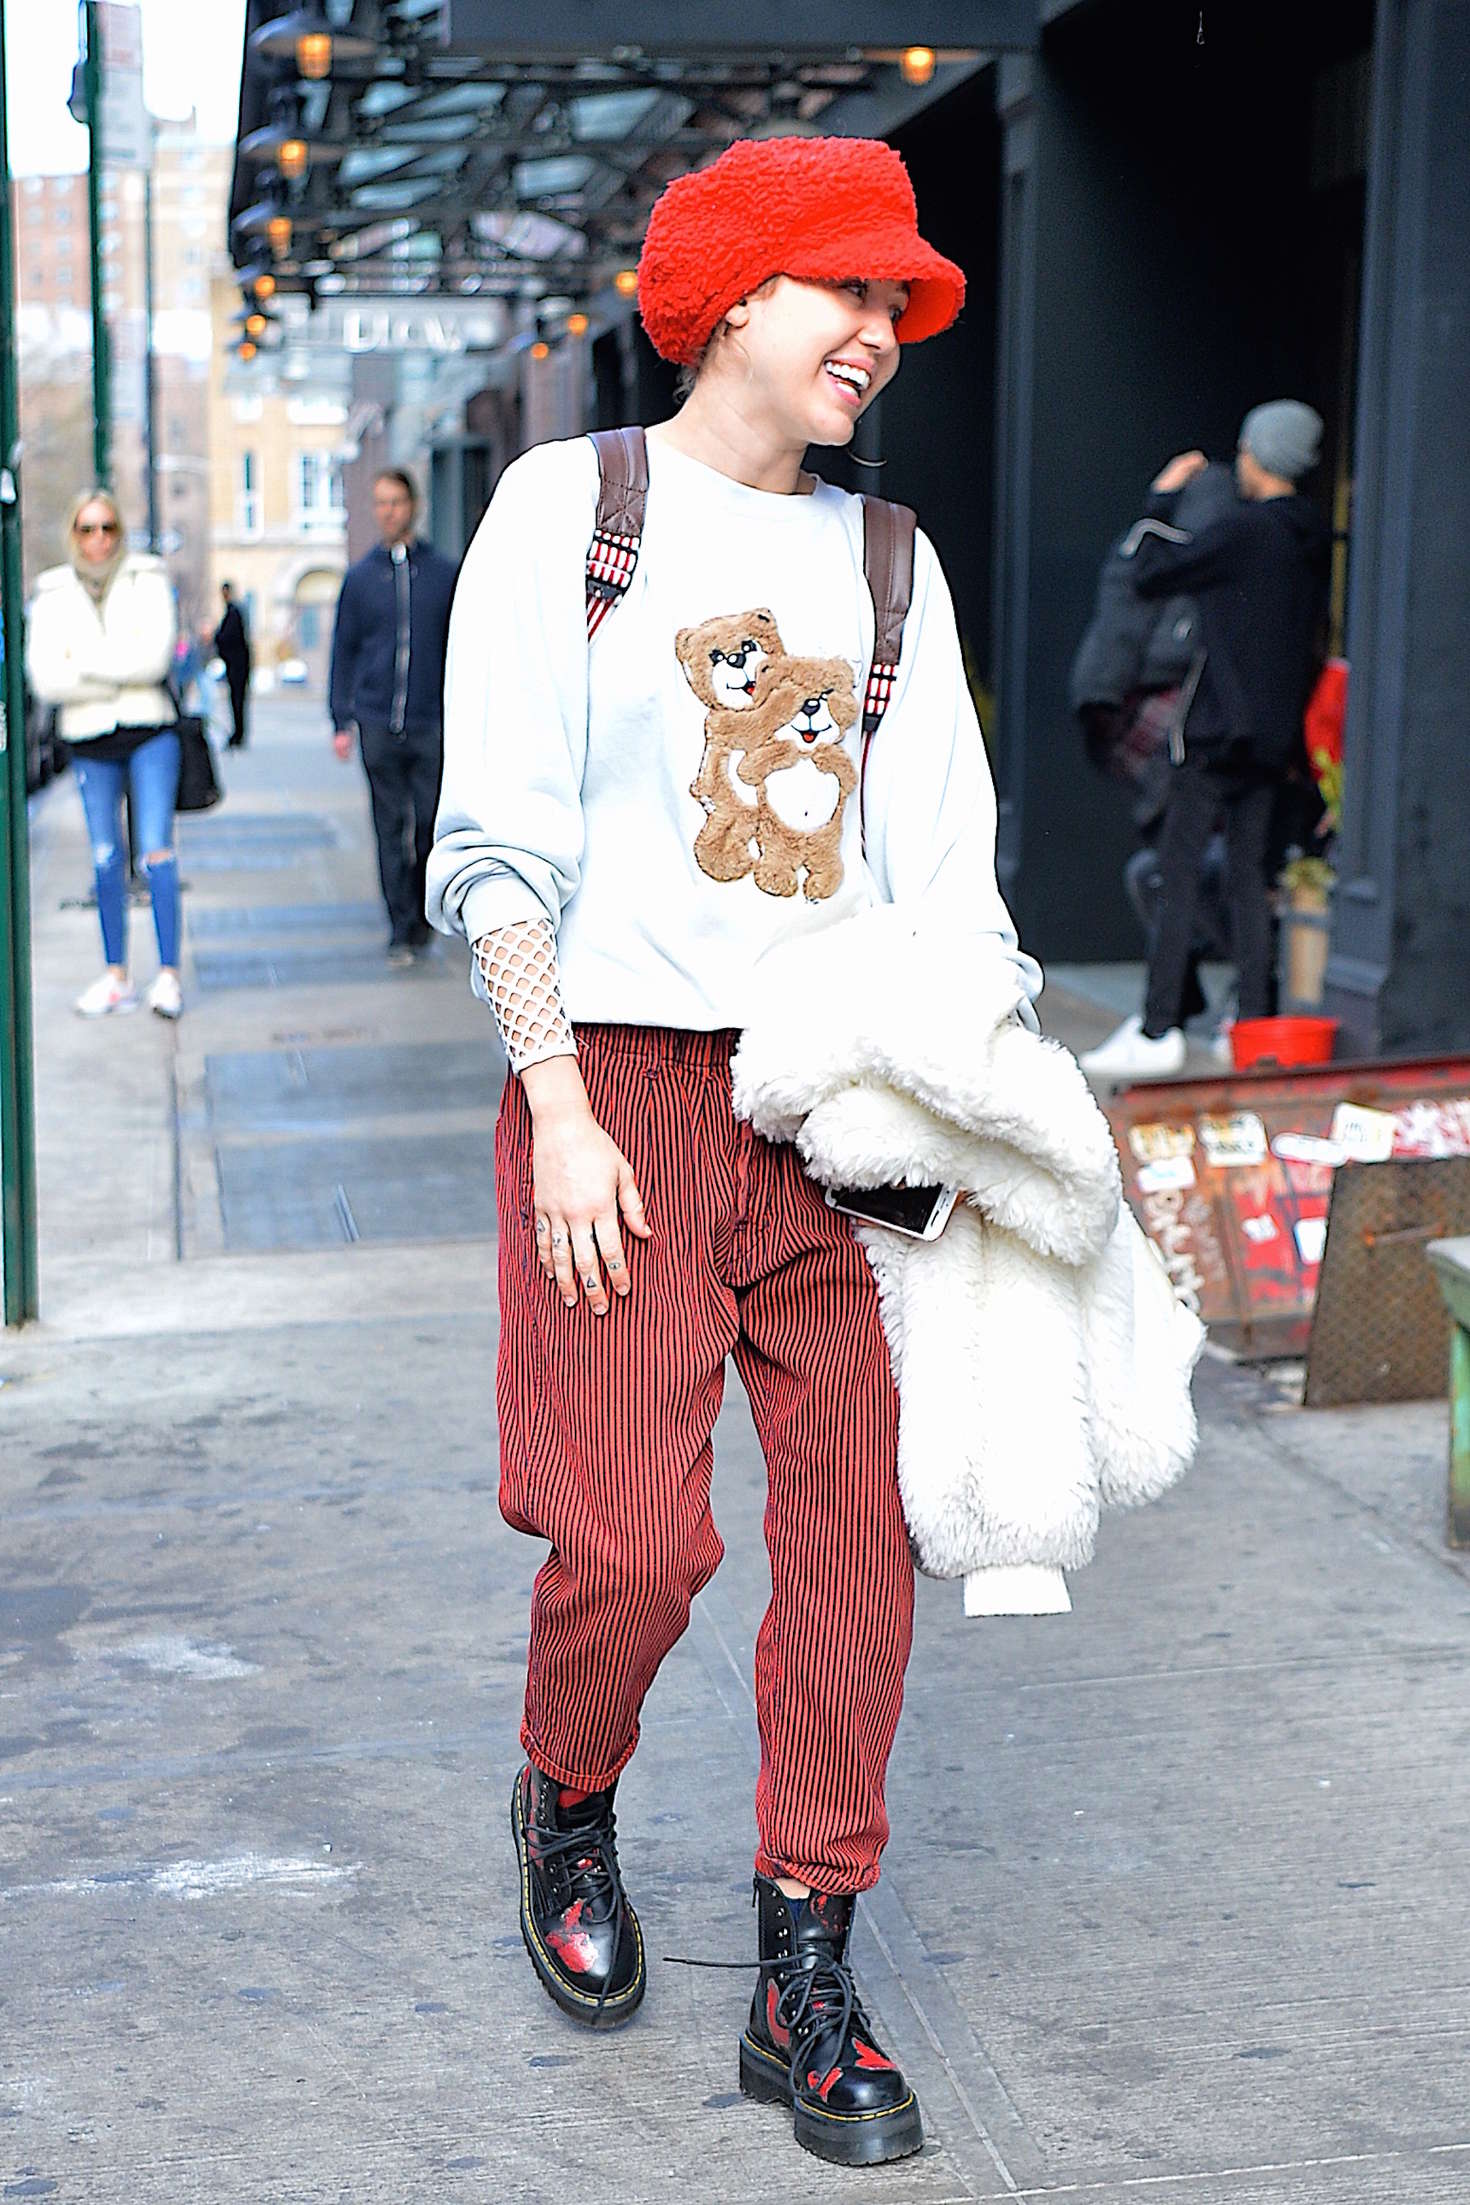 Miley Cyrus in Red Pants out and about in NYC Gallery - Miley Cyrus ...